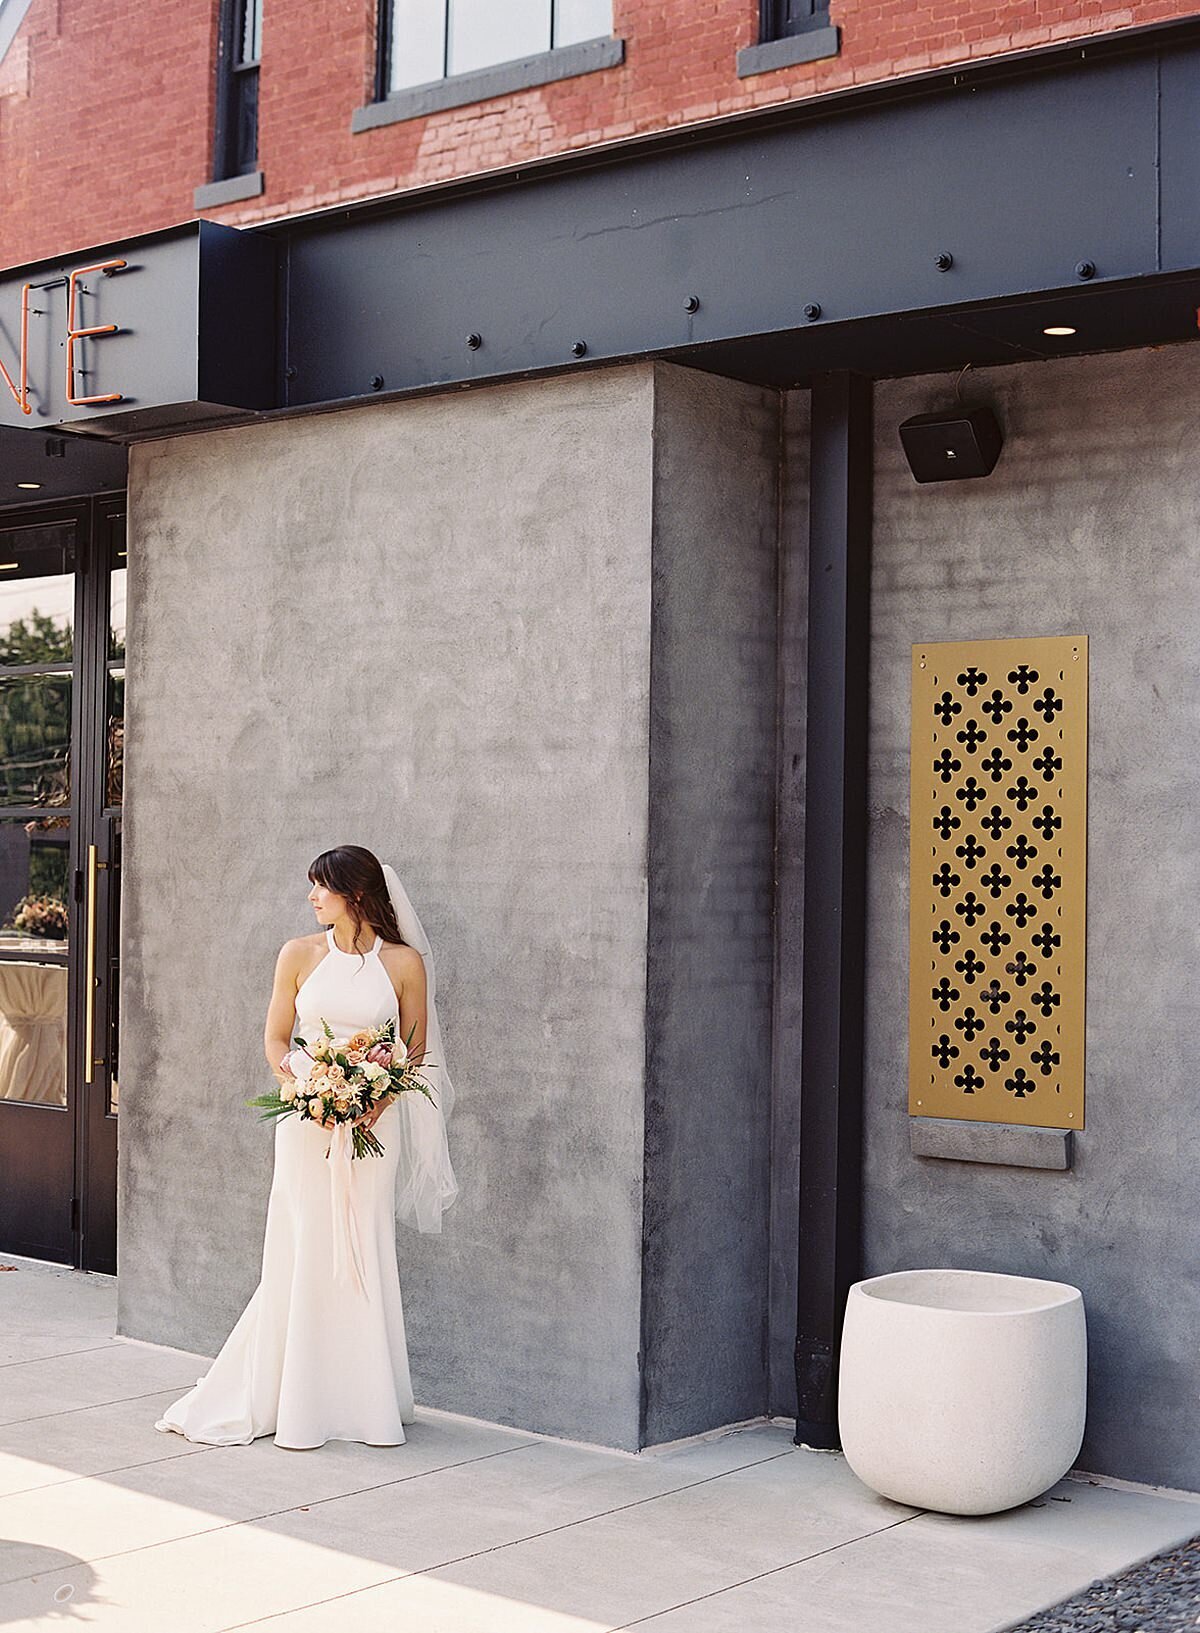 The bride, wearing a halter top silk sheath wedding dress and long veil stands in the courtyard at Clementine Hall holding her horizontal cascade bouquet filled with white, ivory, peach, yellow and pink tropical flowers, orchids, palm fronds and protea. The courtyard of Clementine Hall is accented with gold filigree windows, soft grey walls, white planters and glass doors.